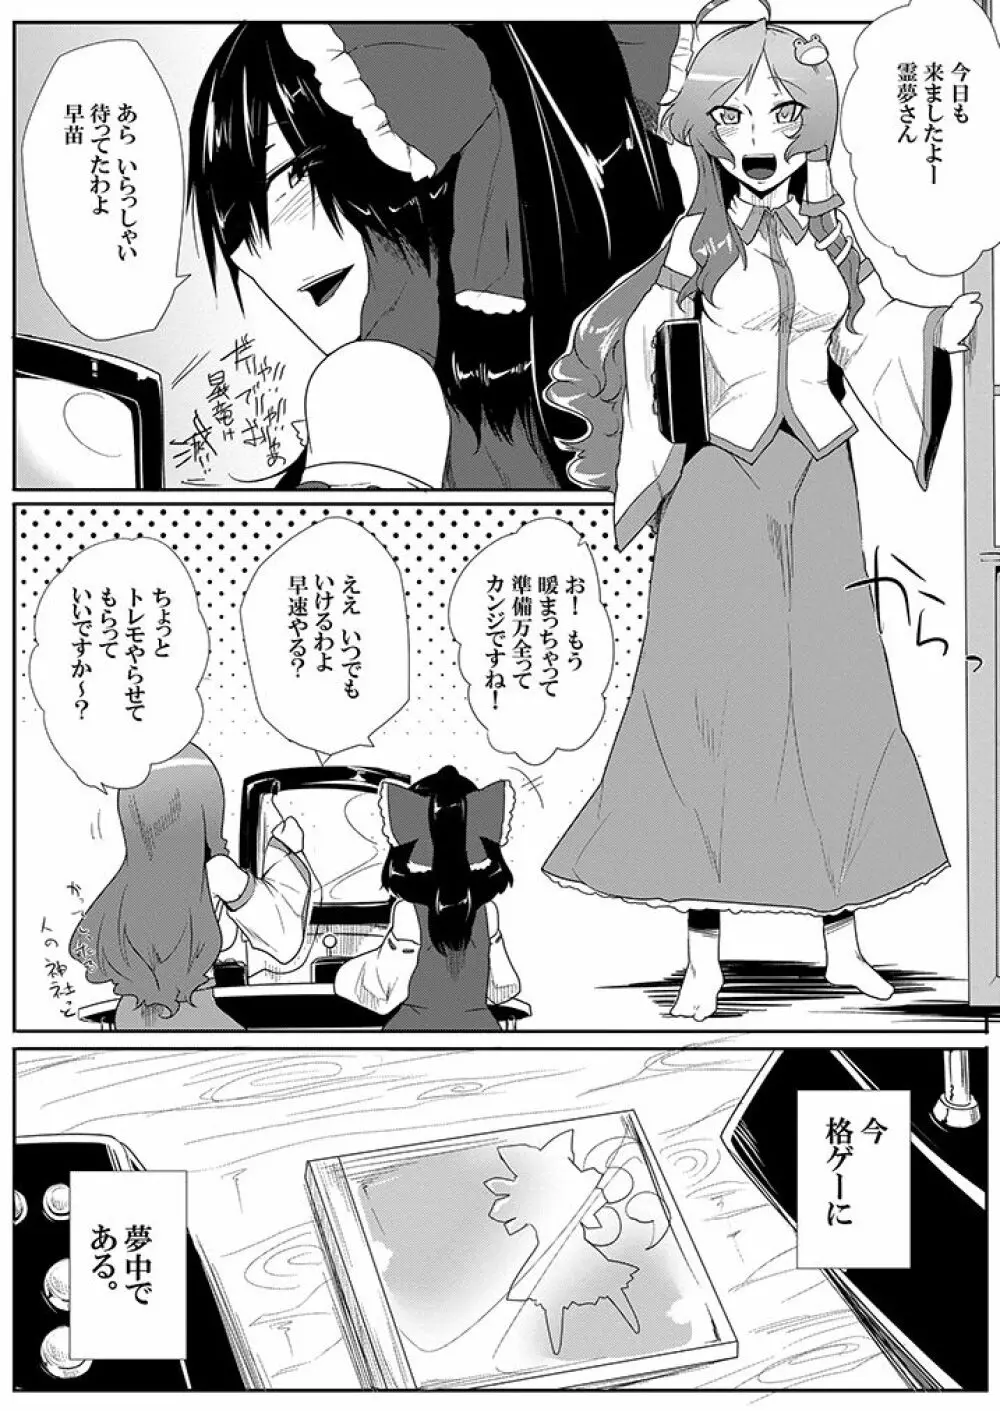 SAKUYA MAID in HEAVEN/ALL IN 1 - page382